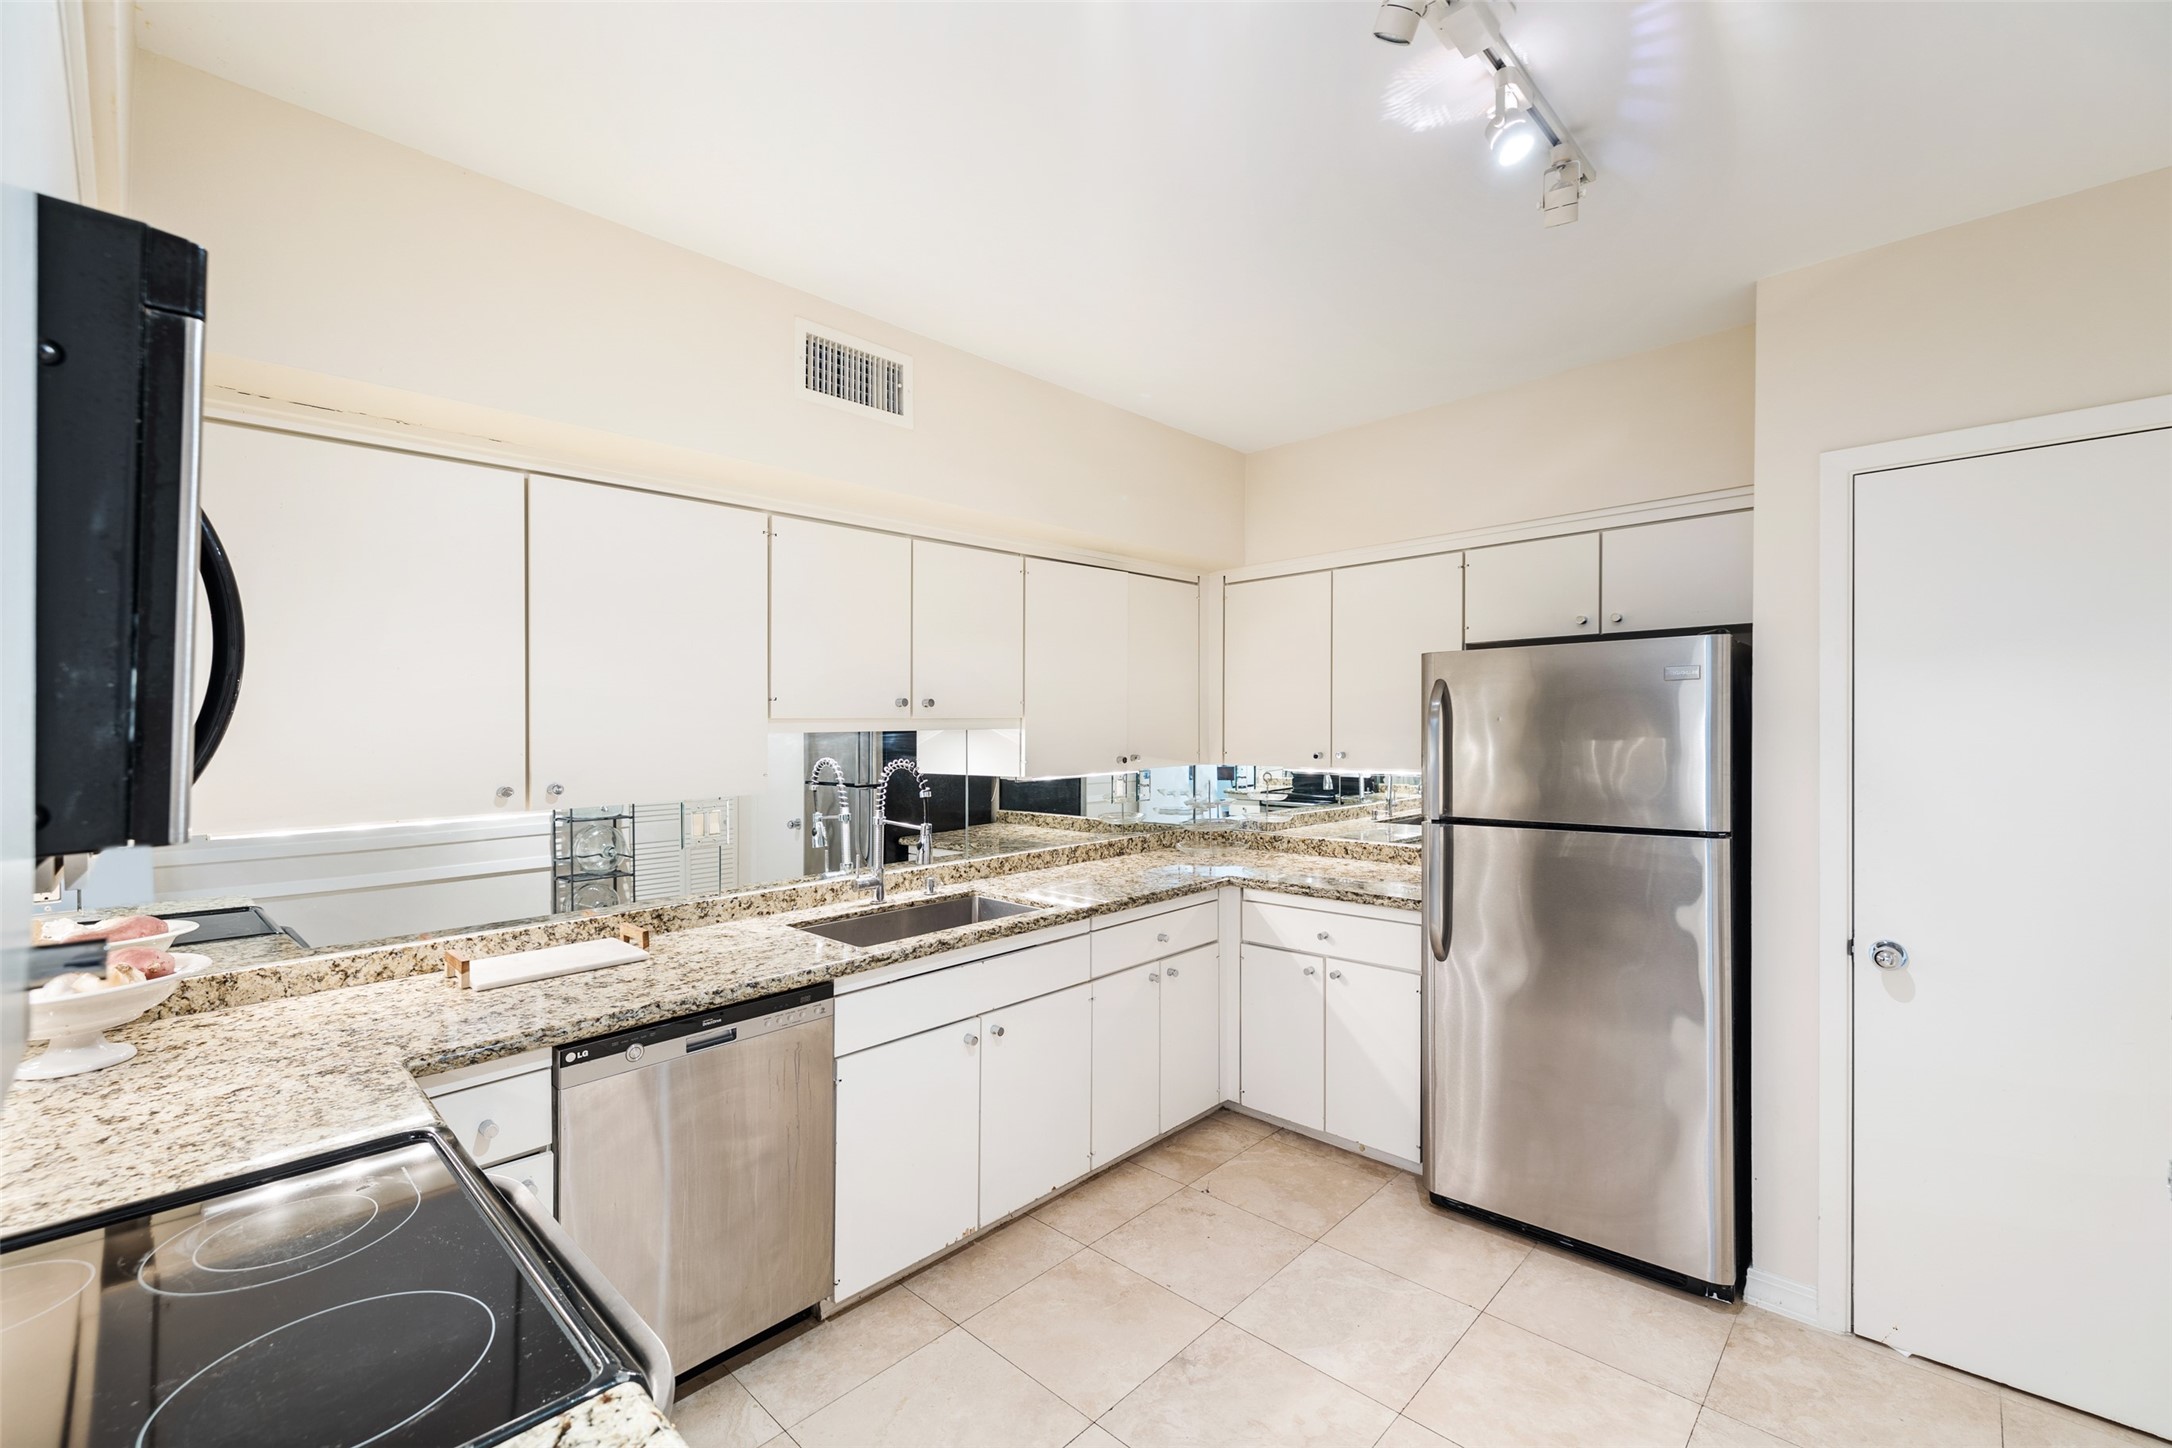 The Kitchen is equipped with stainless steel appliances and granite counter tops. Pantry with built in shelving.